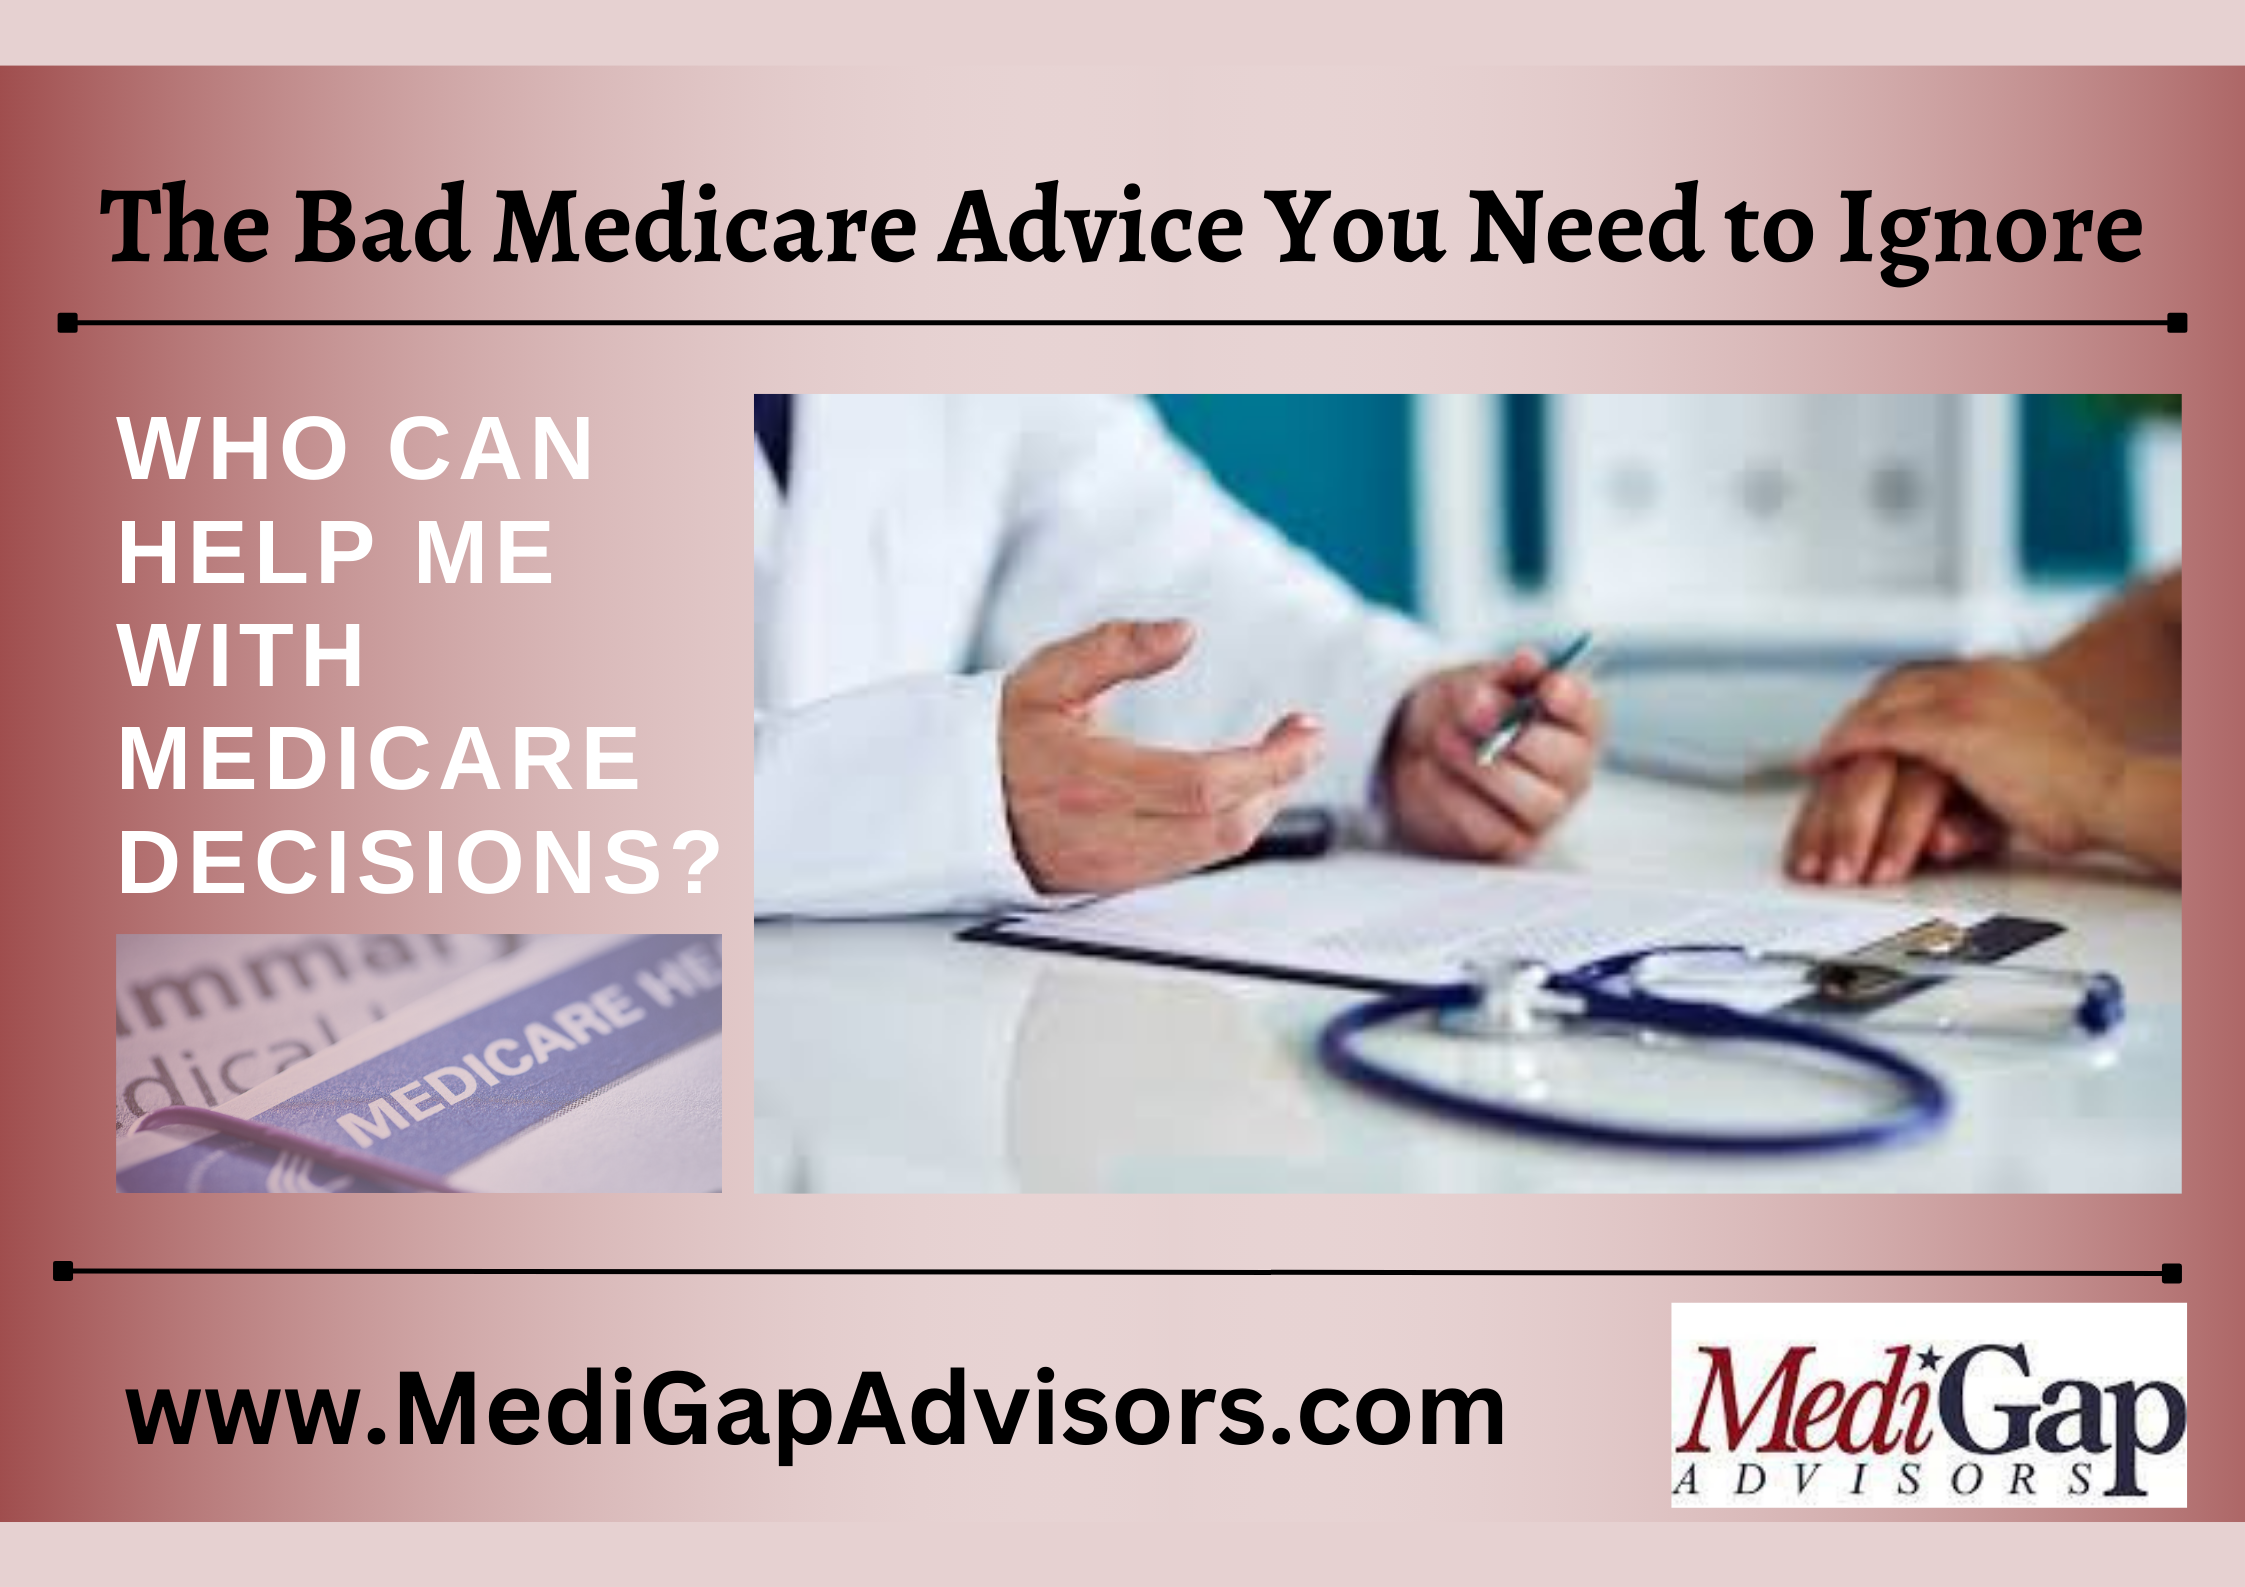 The Bad Medicare Advice You Need to Ignore